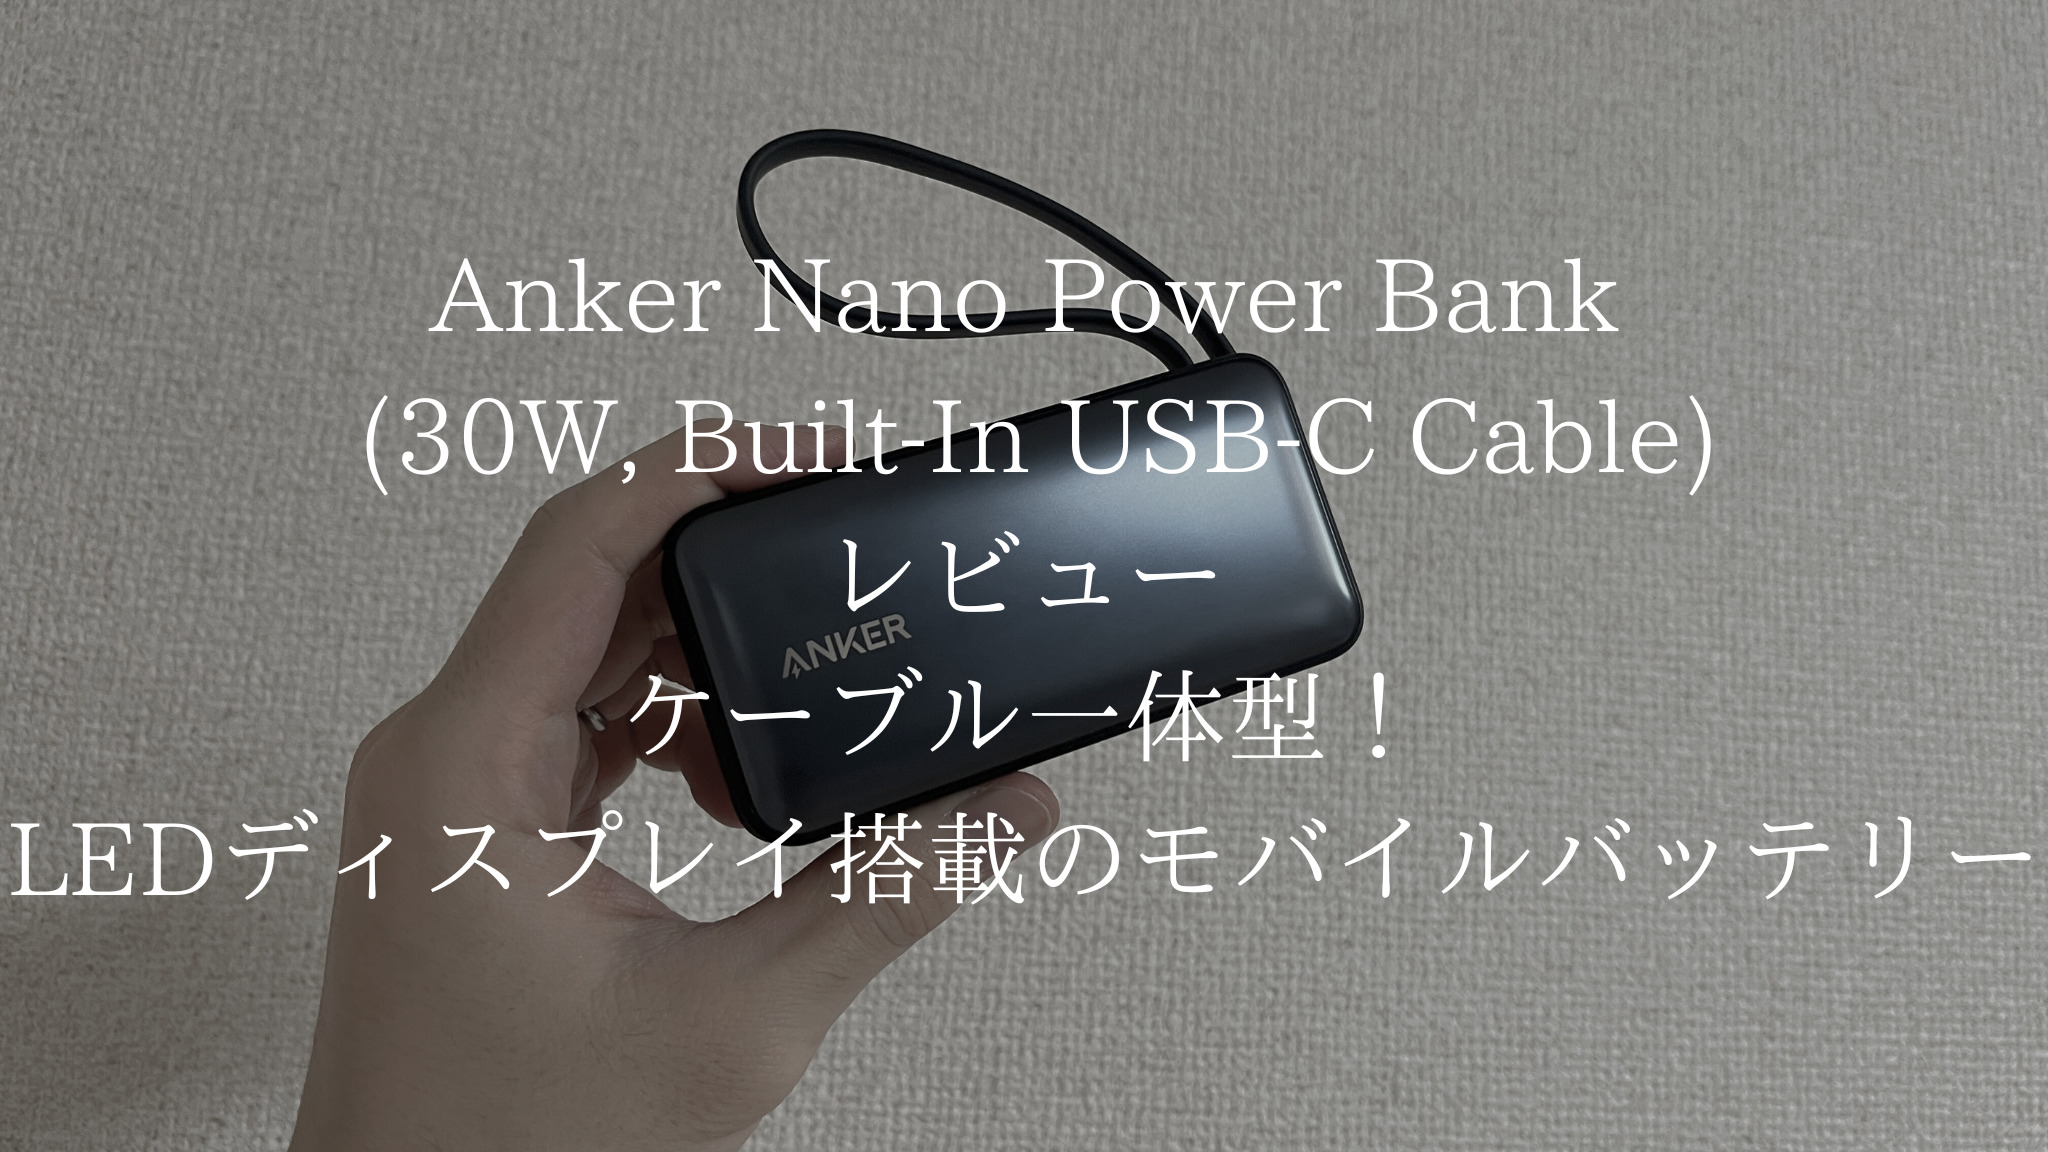 Anker Nano Power Bank (30W, Built-In USB-C Cable)のアイキャッチ画像